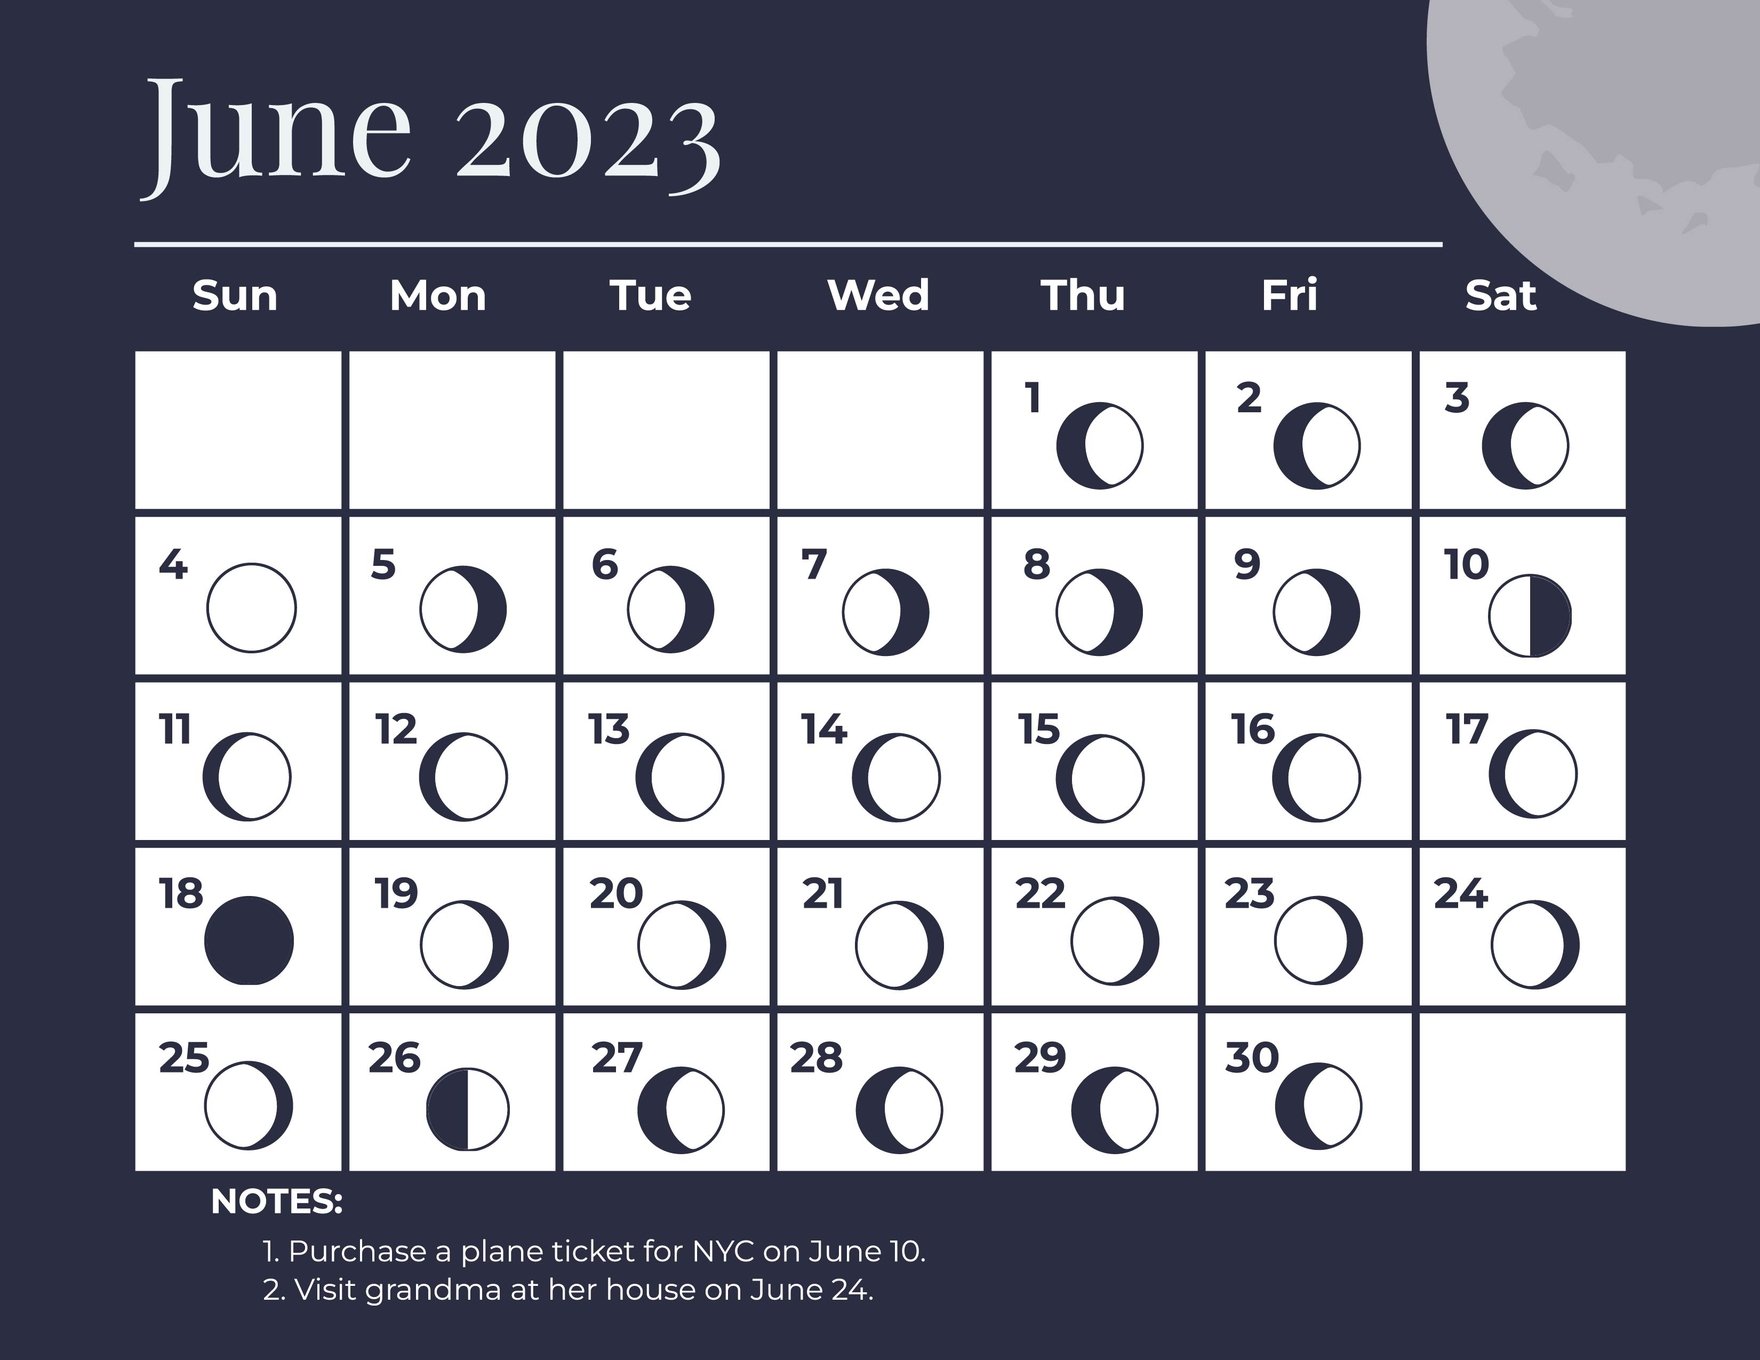 June 2023 Calendar Template With Moon Phases Google Docs, Illustrator